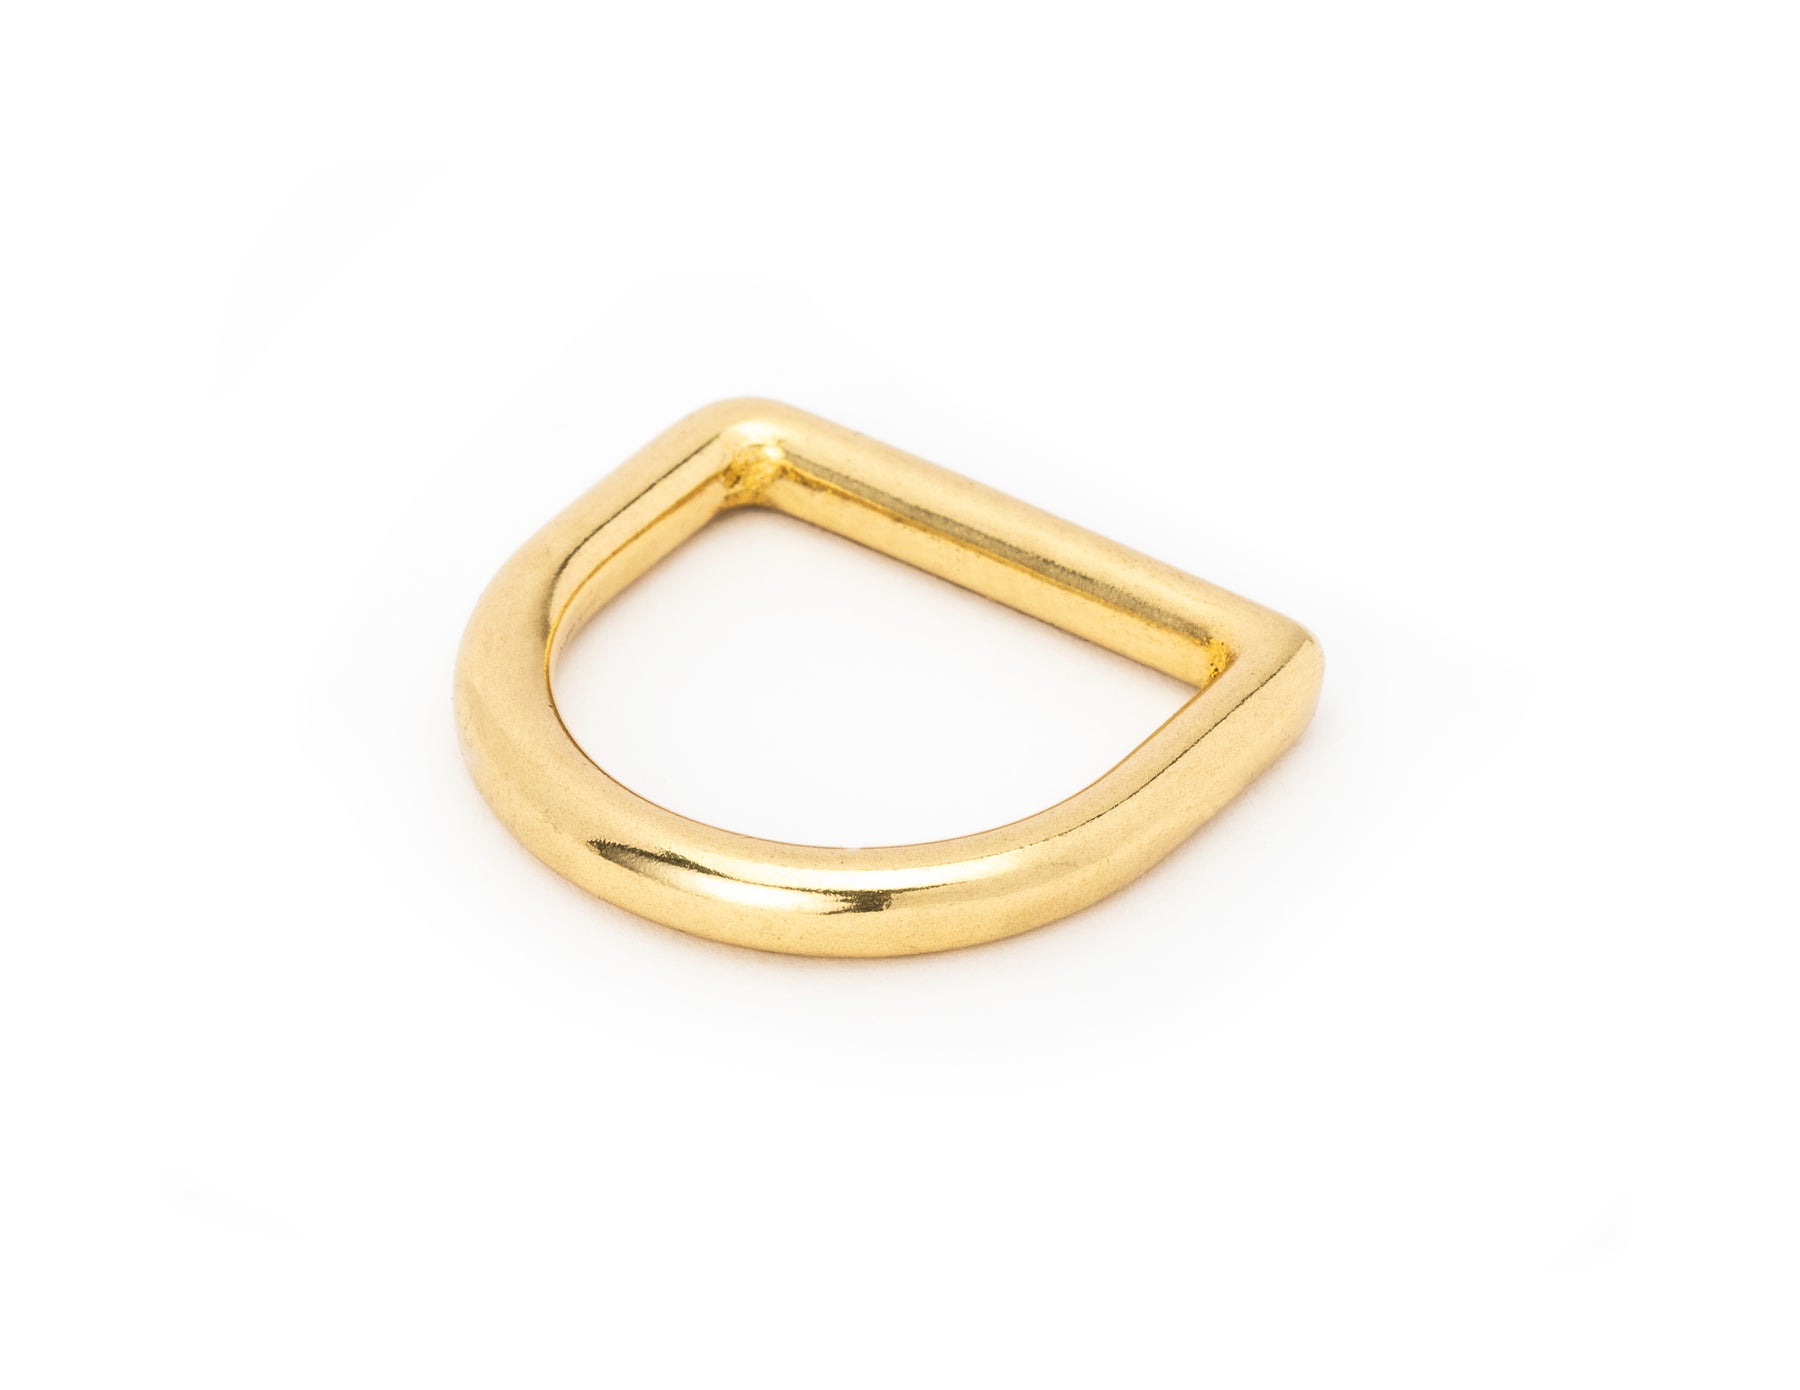 D Rings - Rounded "Thick Base" (Solid Brass) 2 Pack